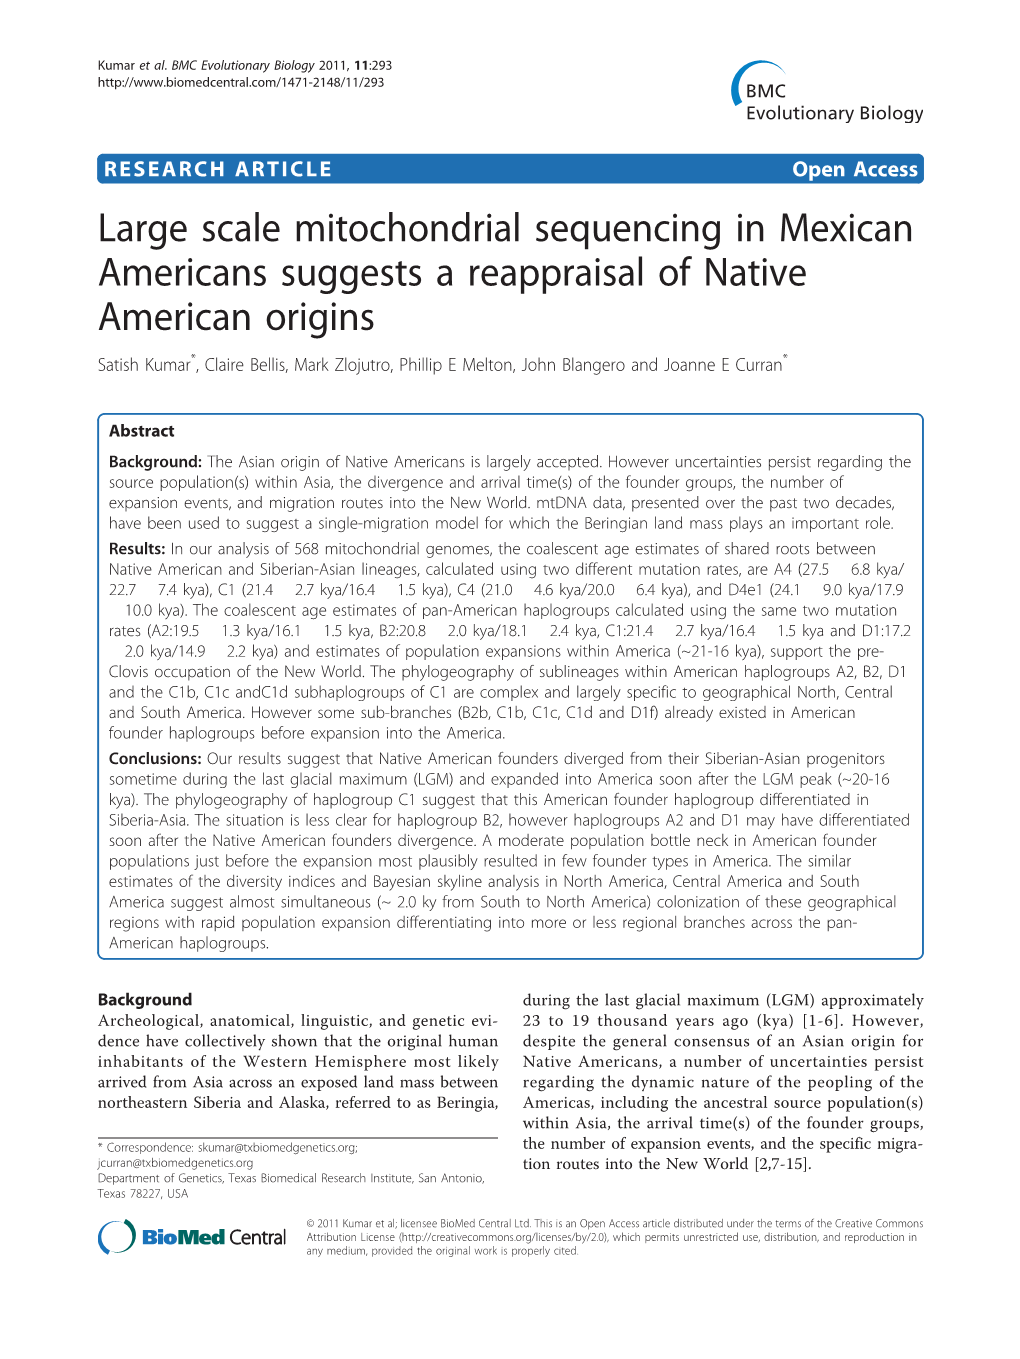 Large Scale Mitochondrial Sequencing in Mexican Americans Suggests A